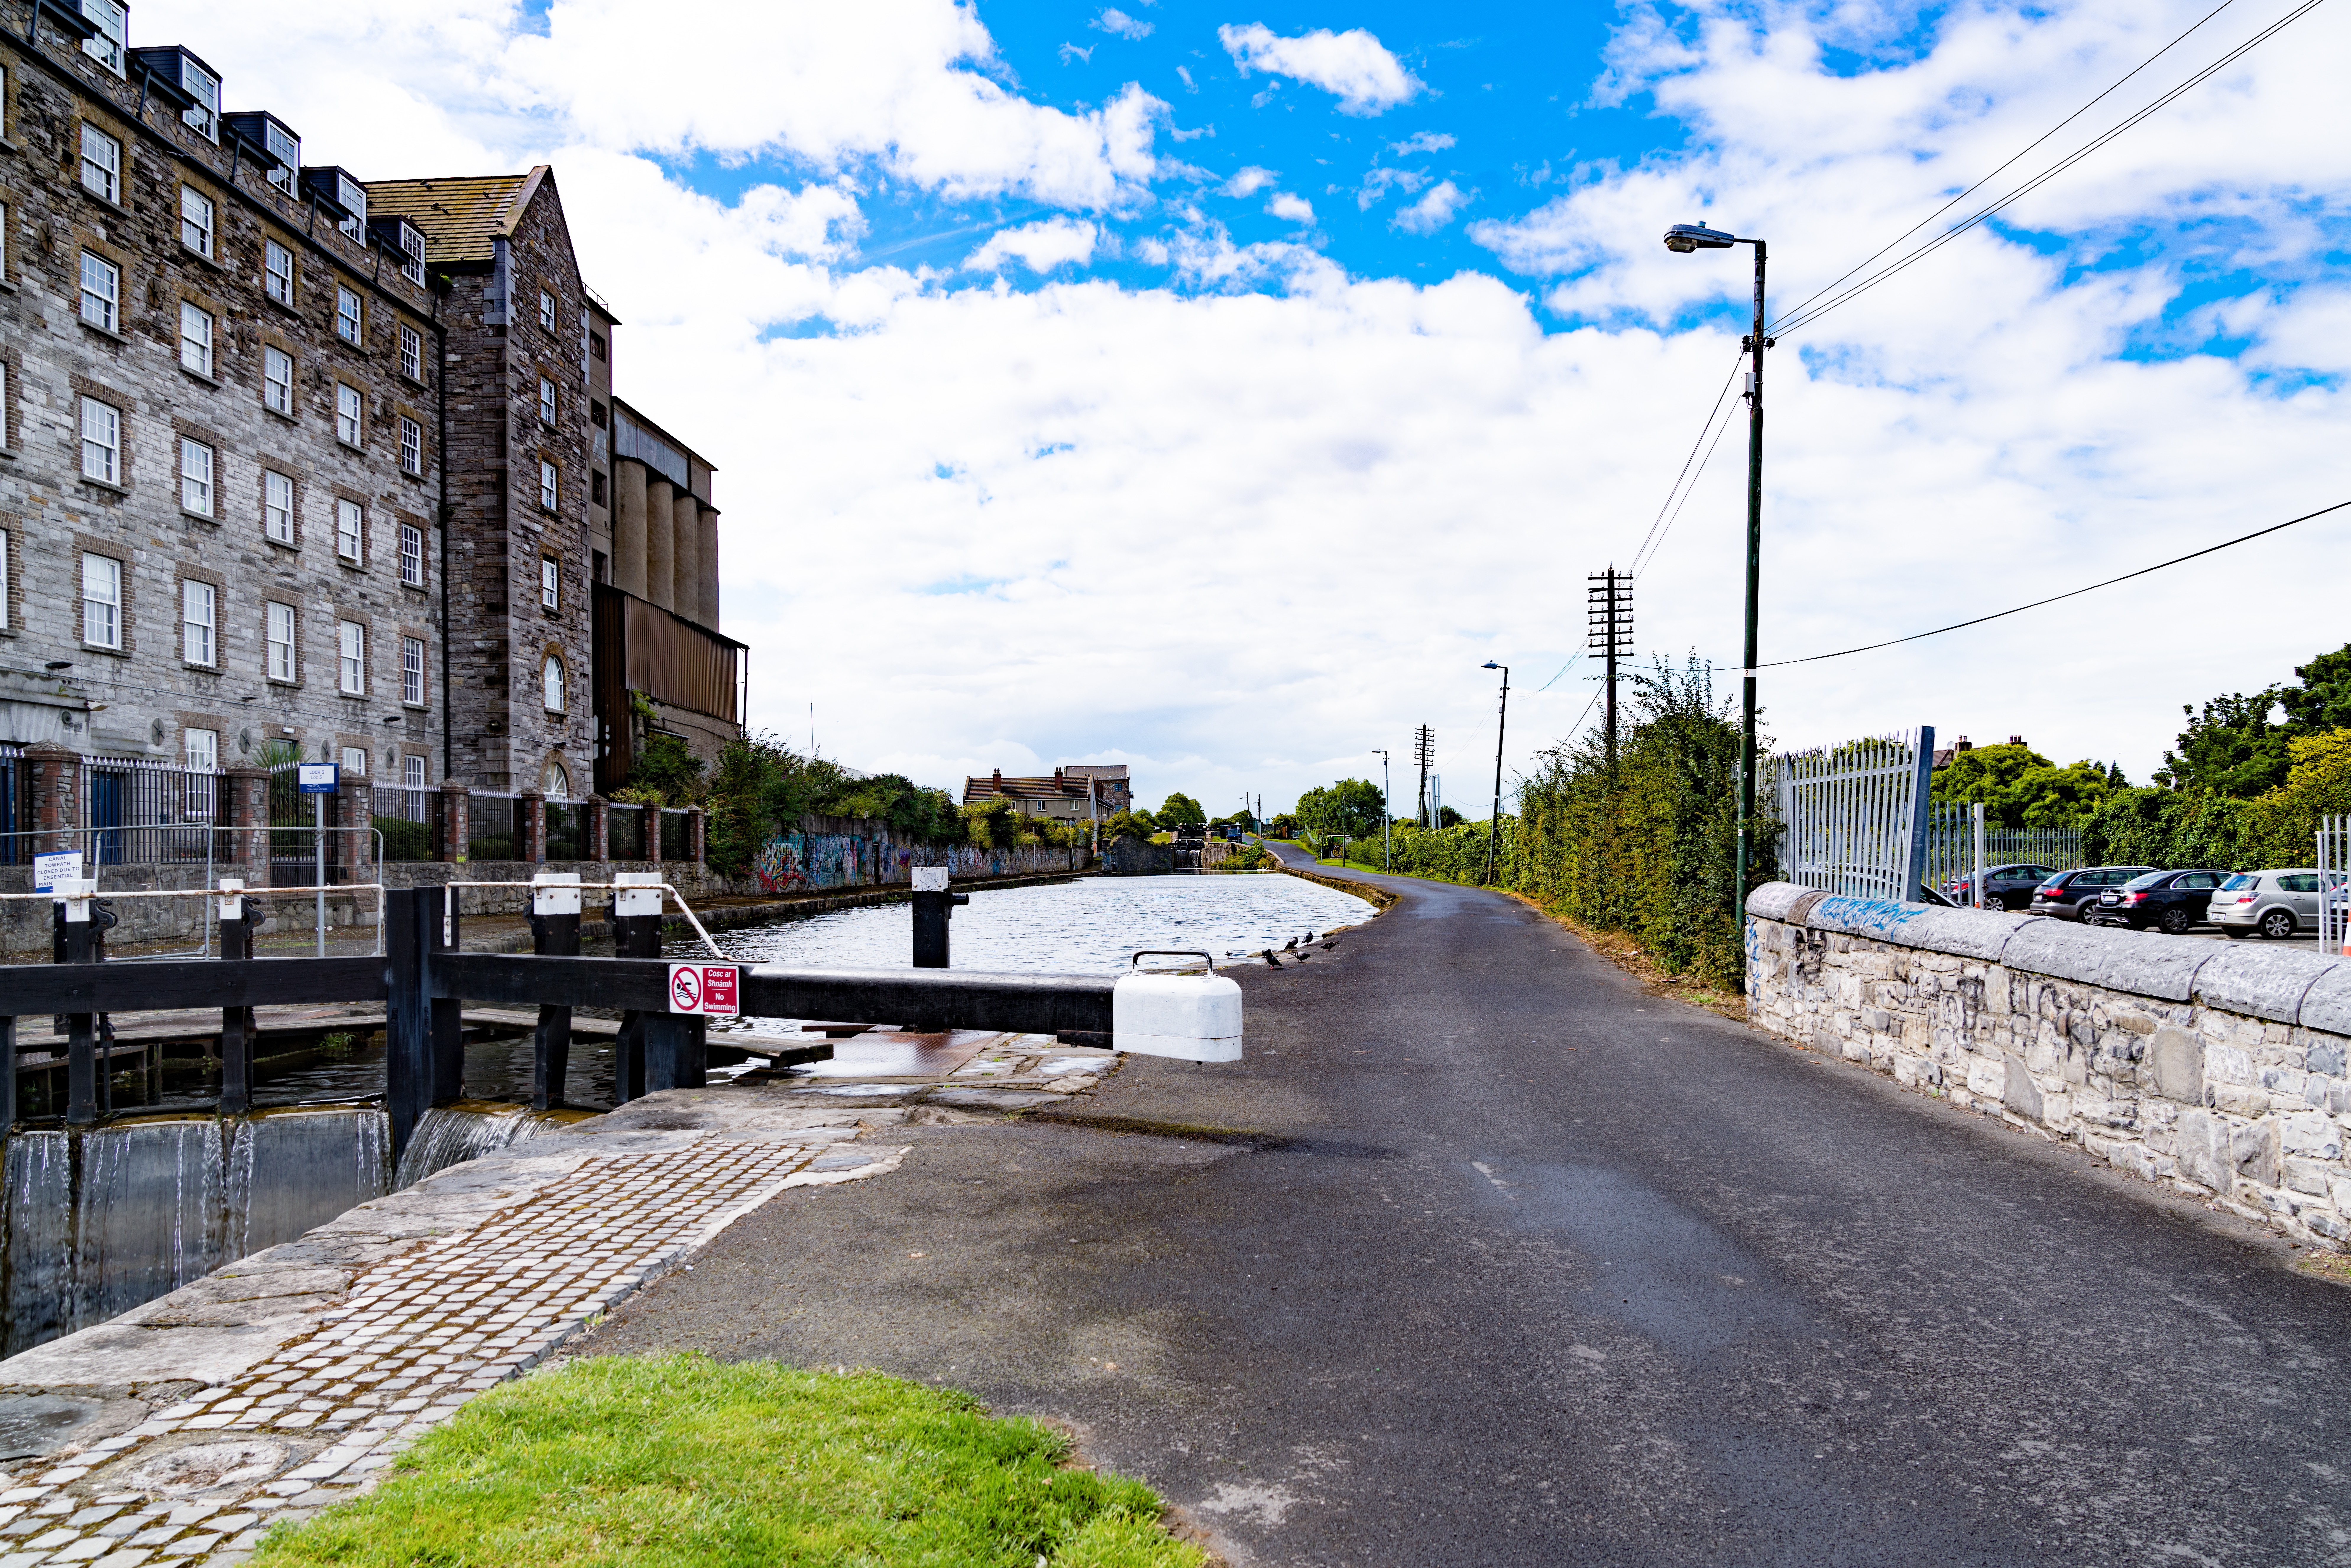  ROYAL CANAL - CABRA AREA 029 